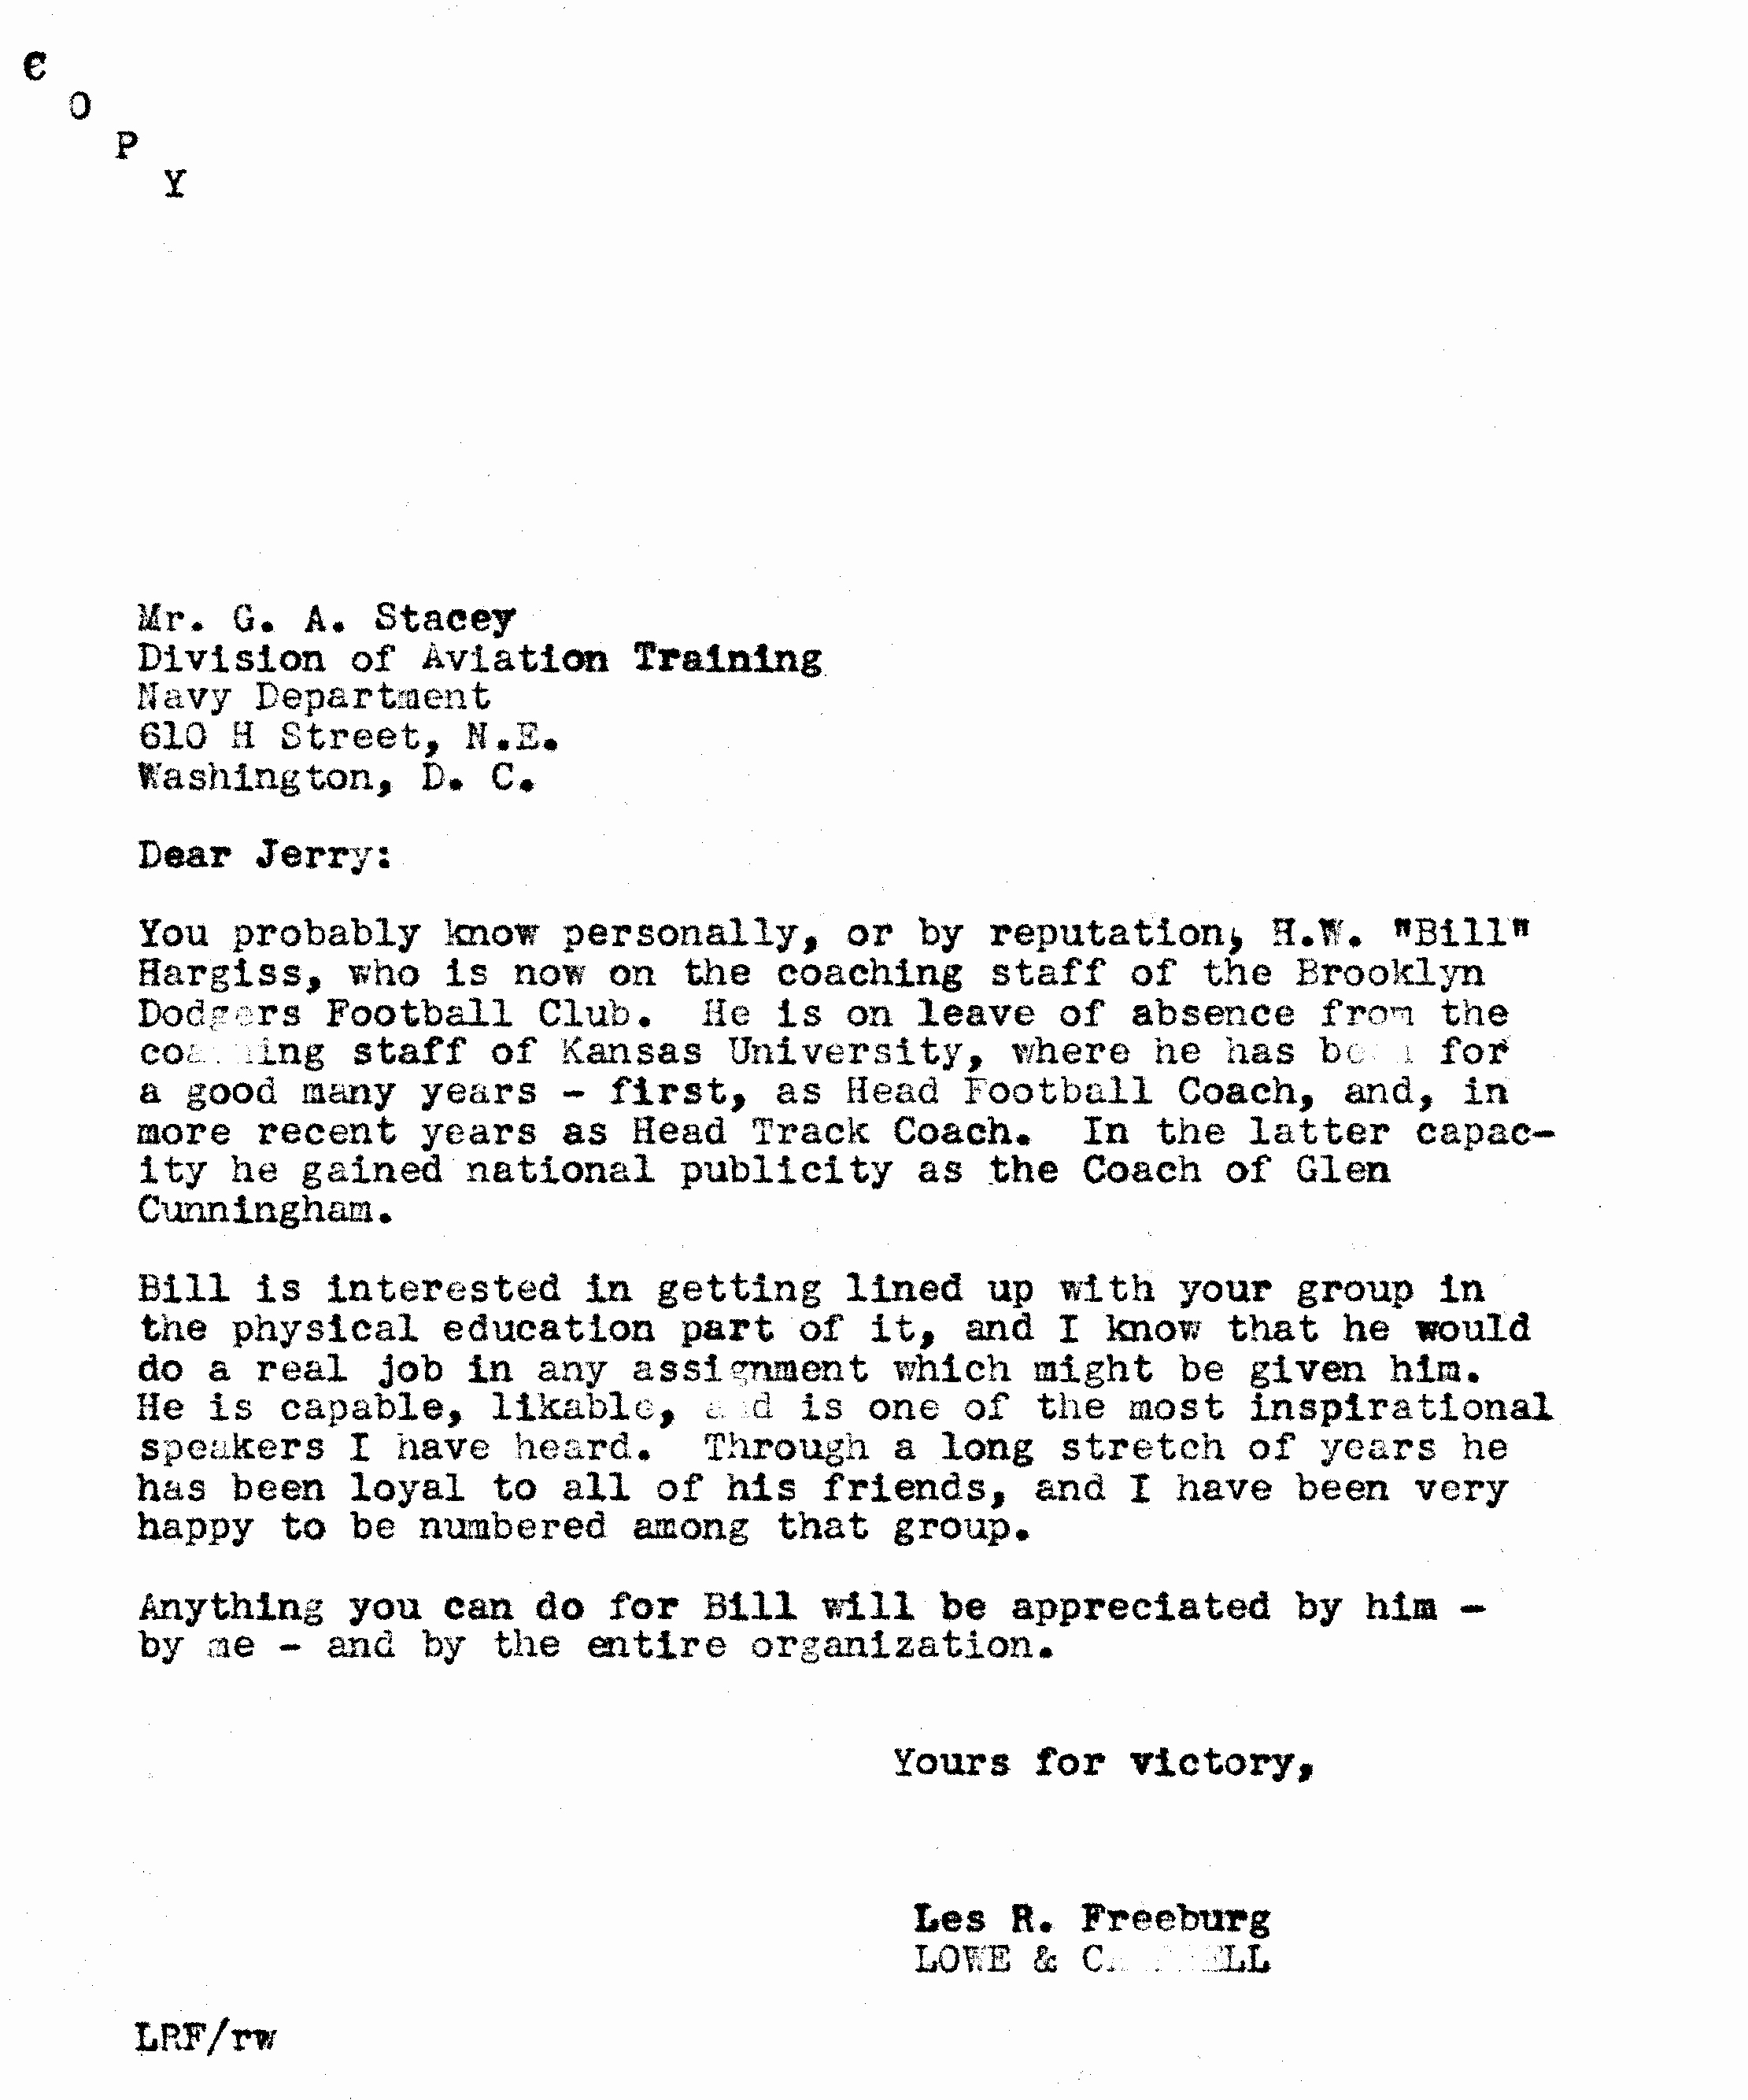 Naval Letter Of Recommendation New Les Freeburg Letter Re Mending Hargiss to Us Navy